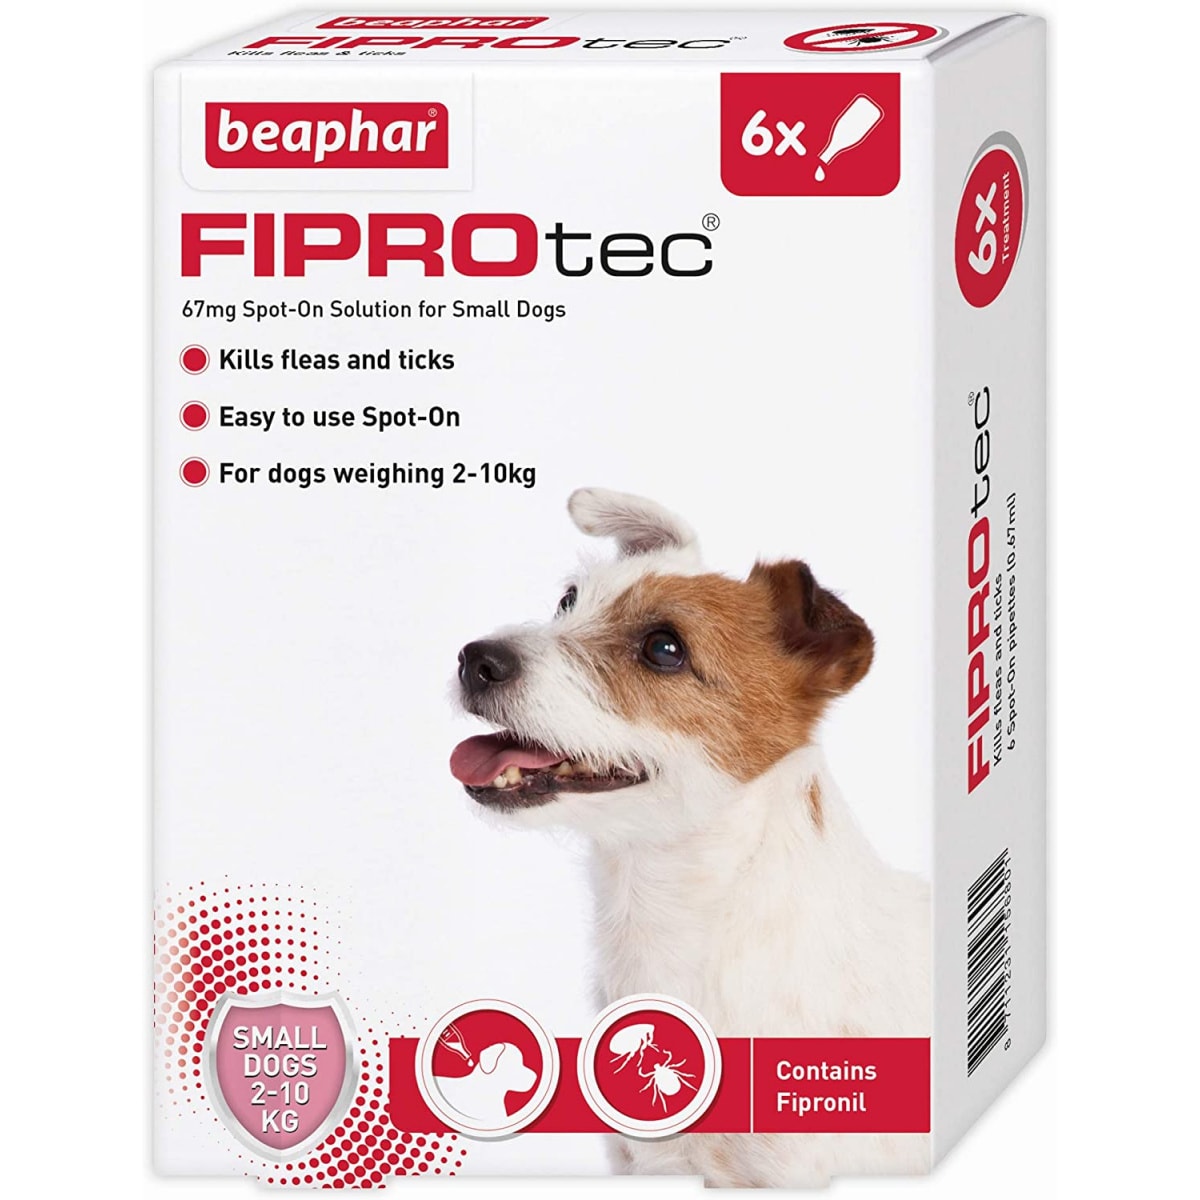 Beaphar - FIPROtec Spot On Small Dog Product Image